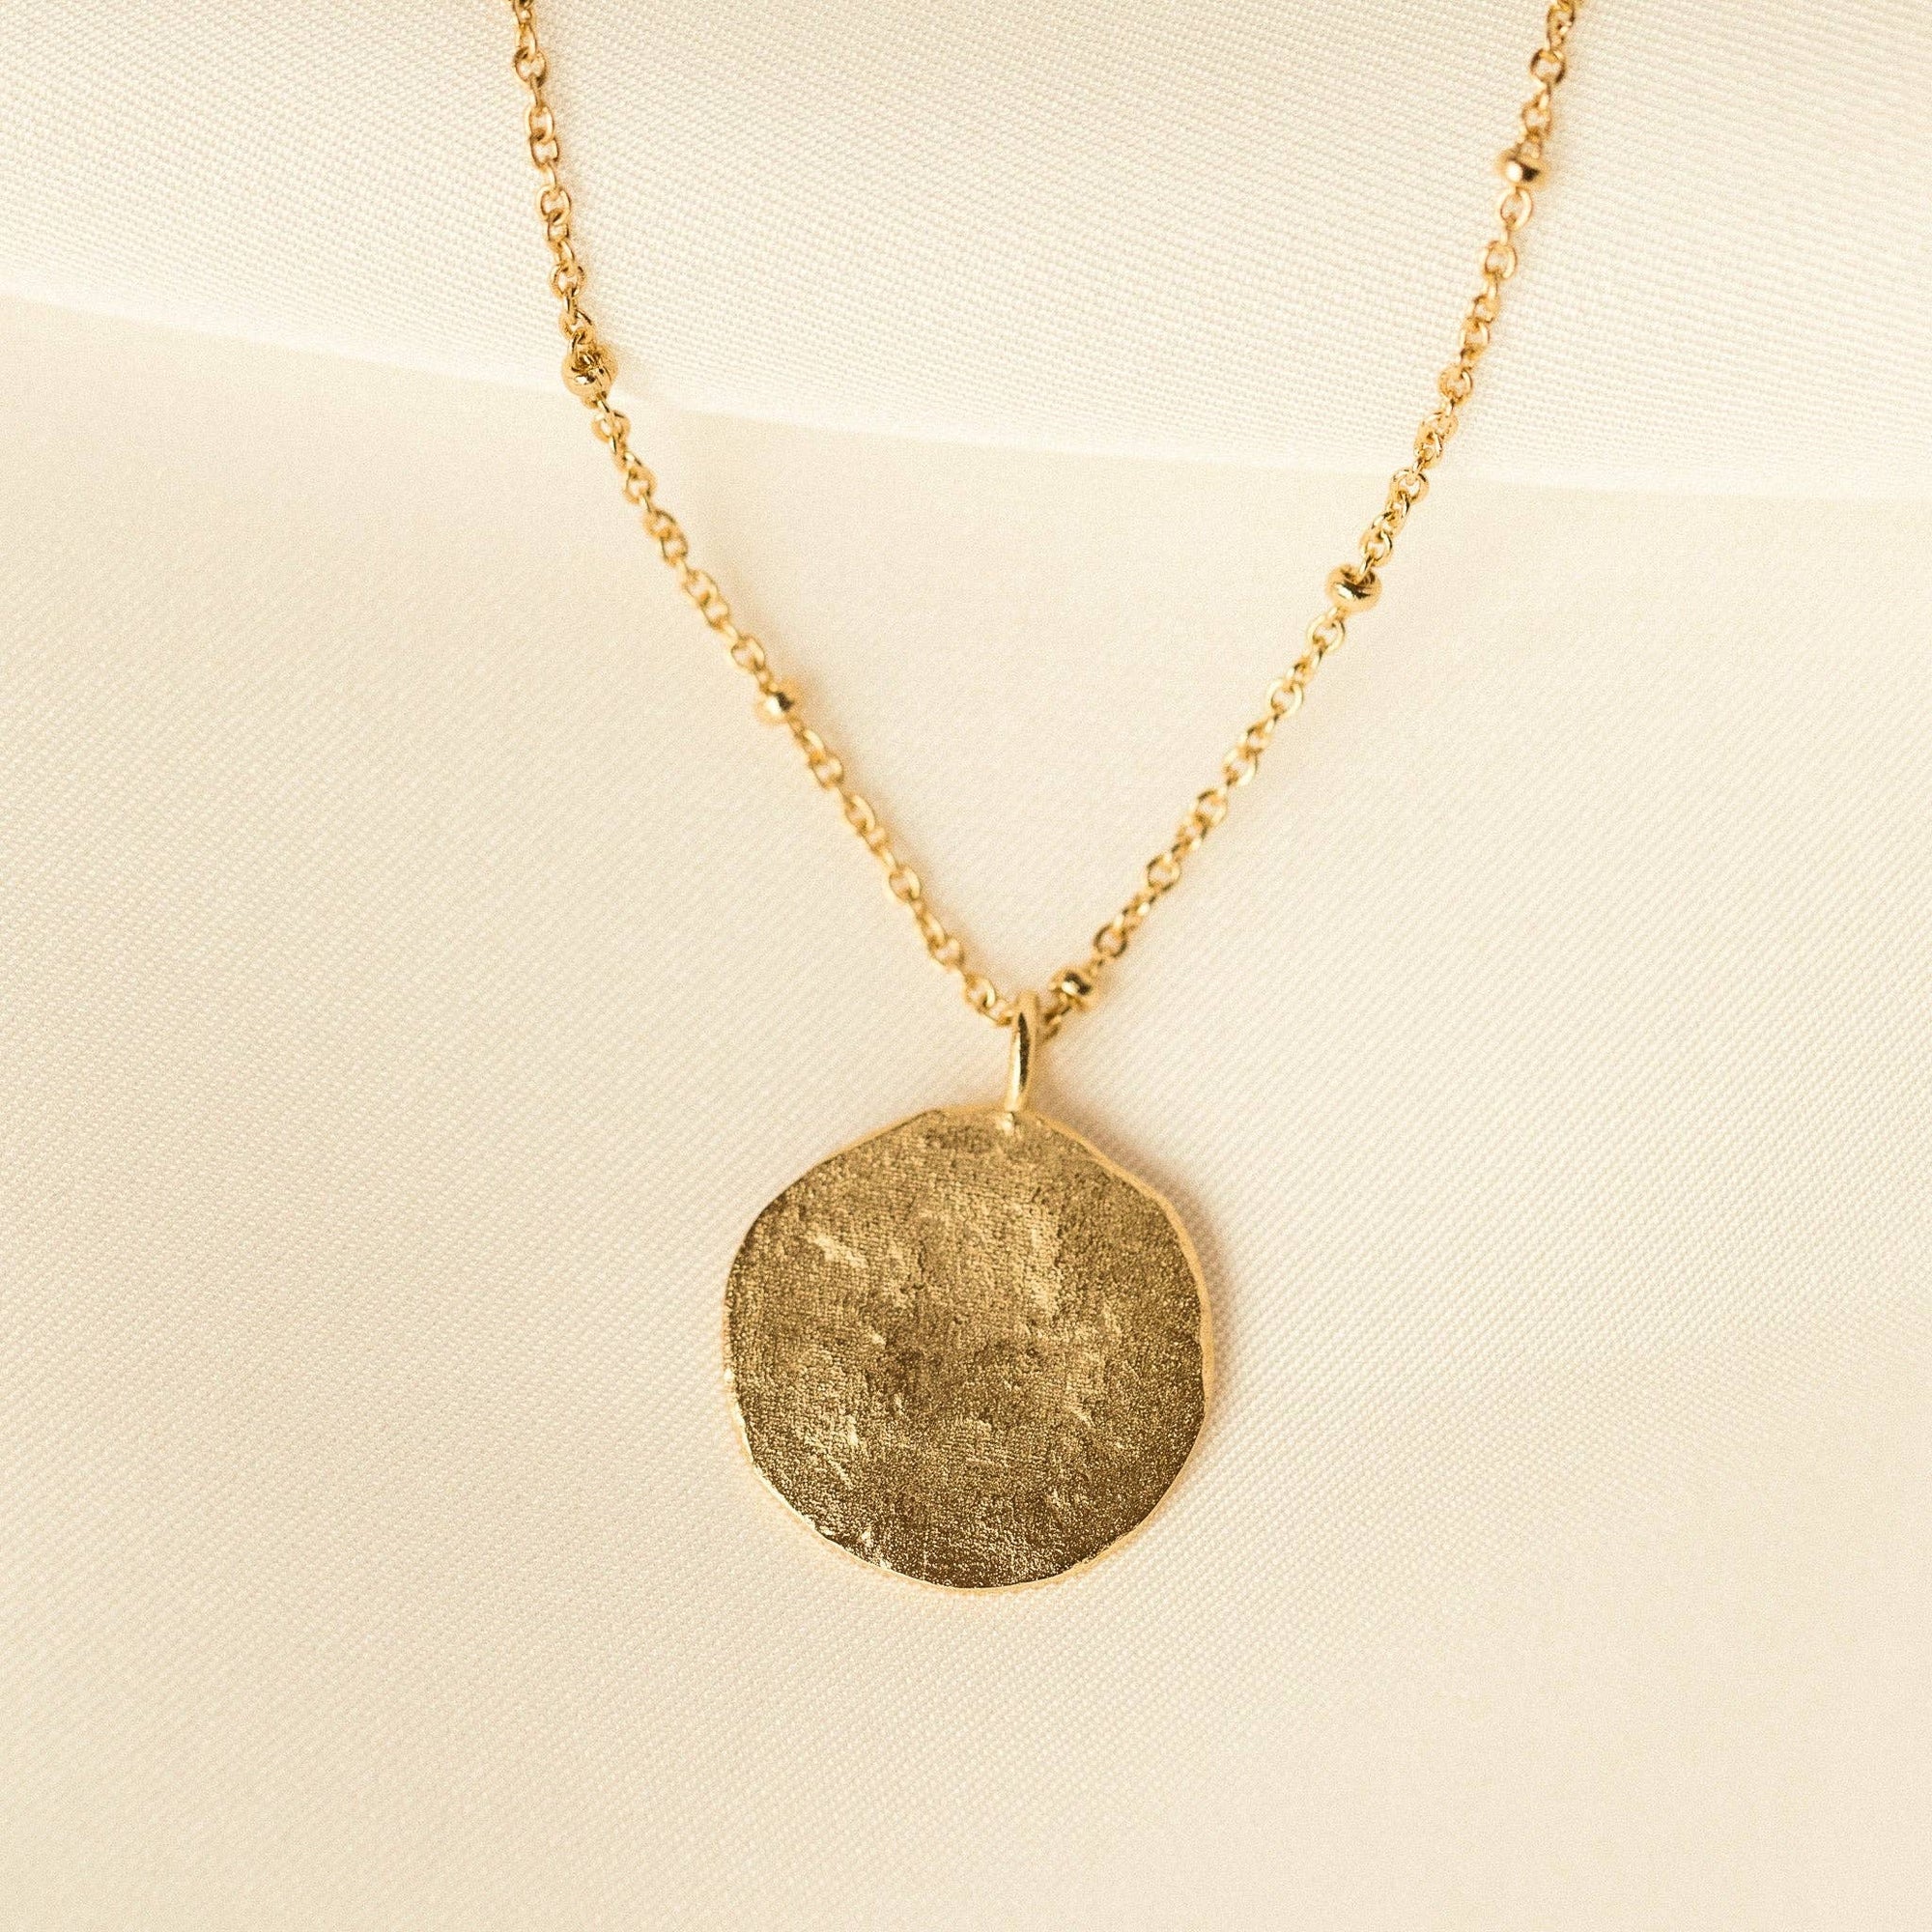 Luna Necklace | Jewelry Gold Gift Waterproof